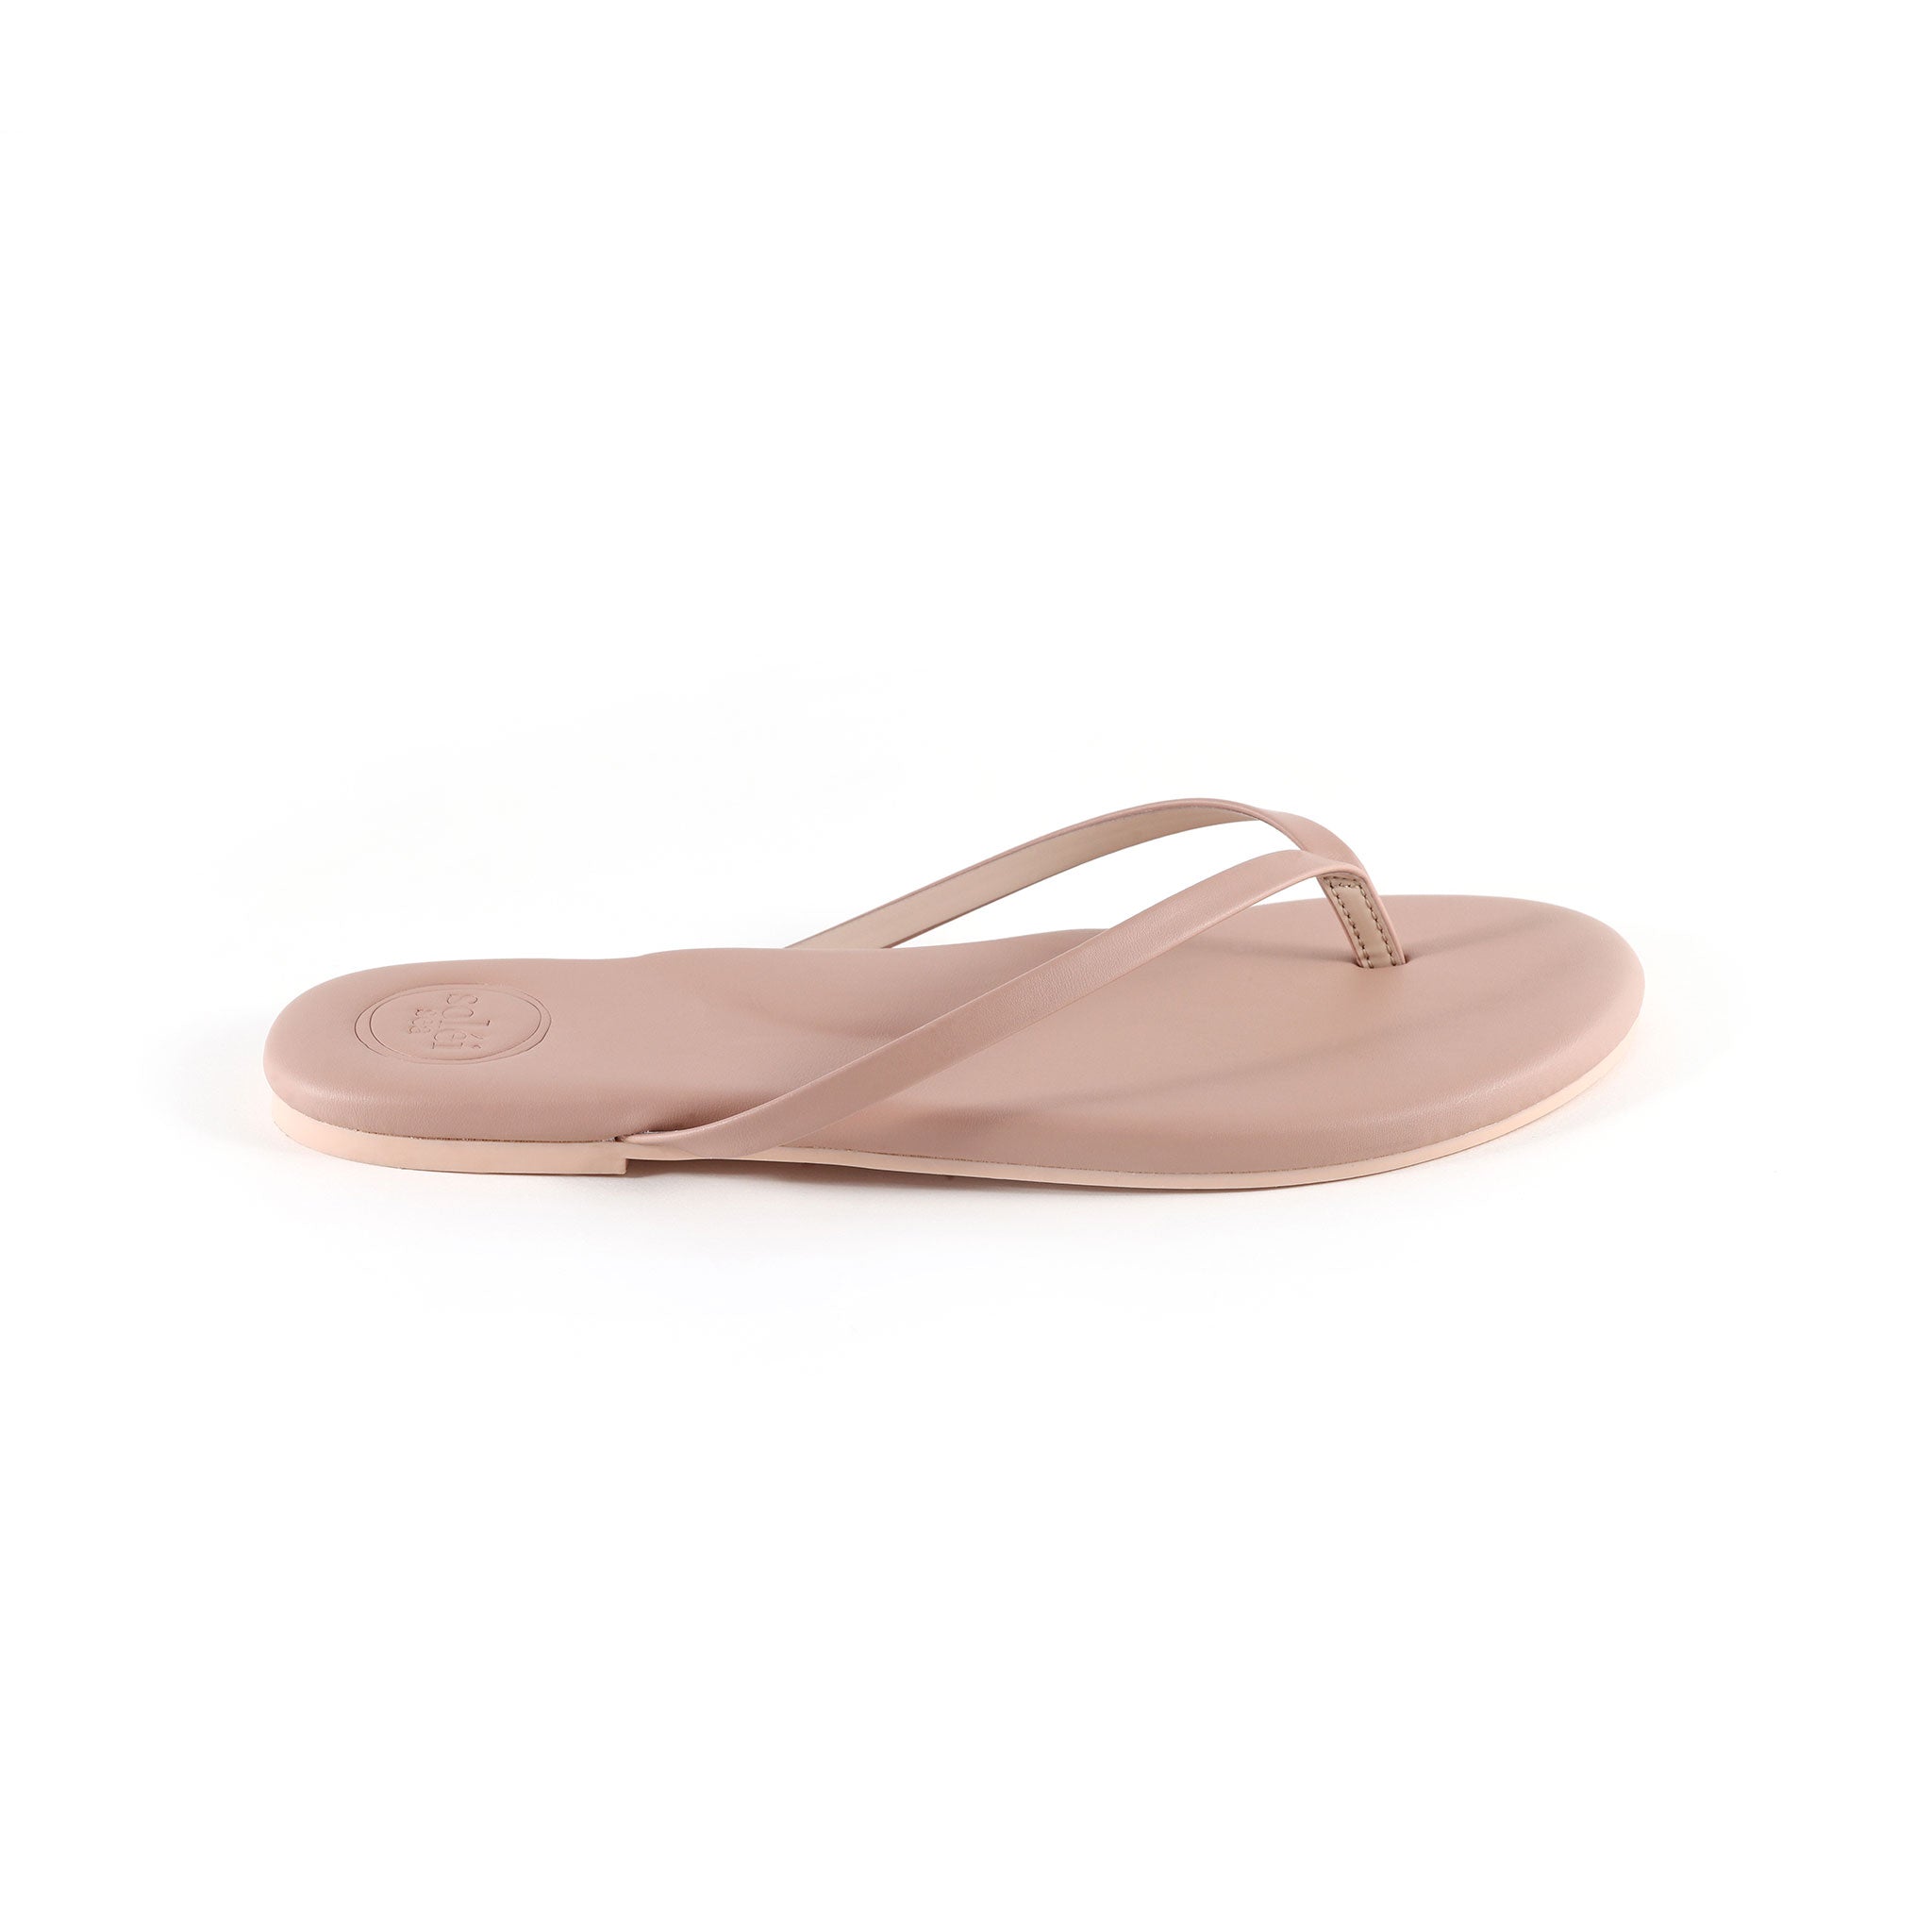 Indie Cappuccino Sandal